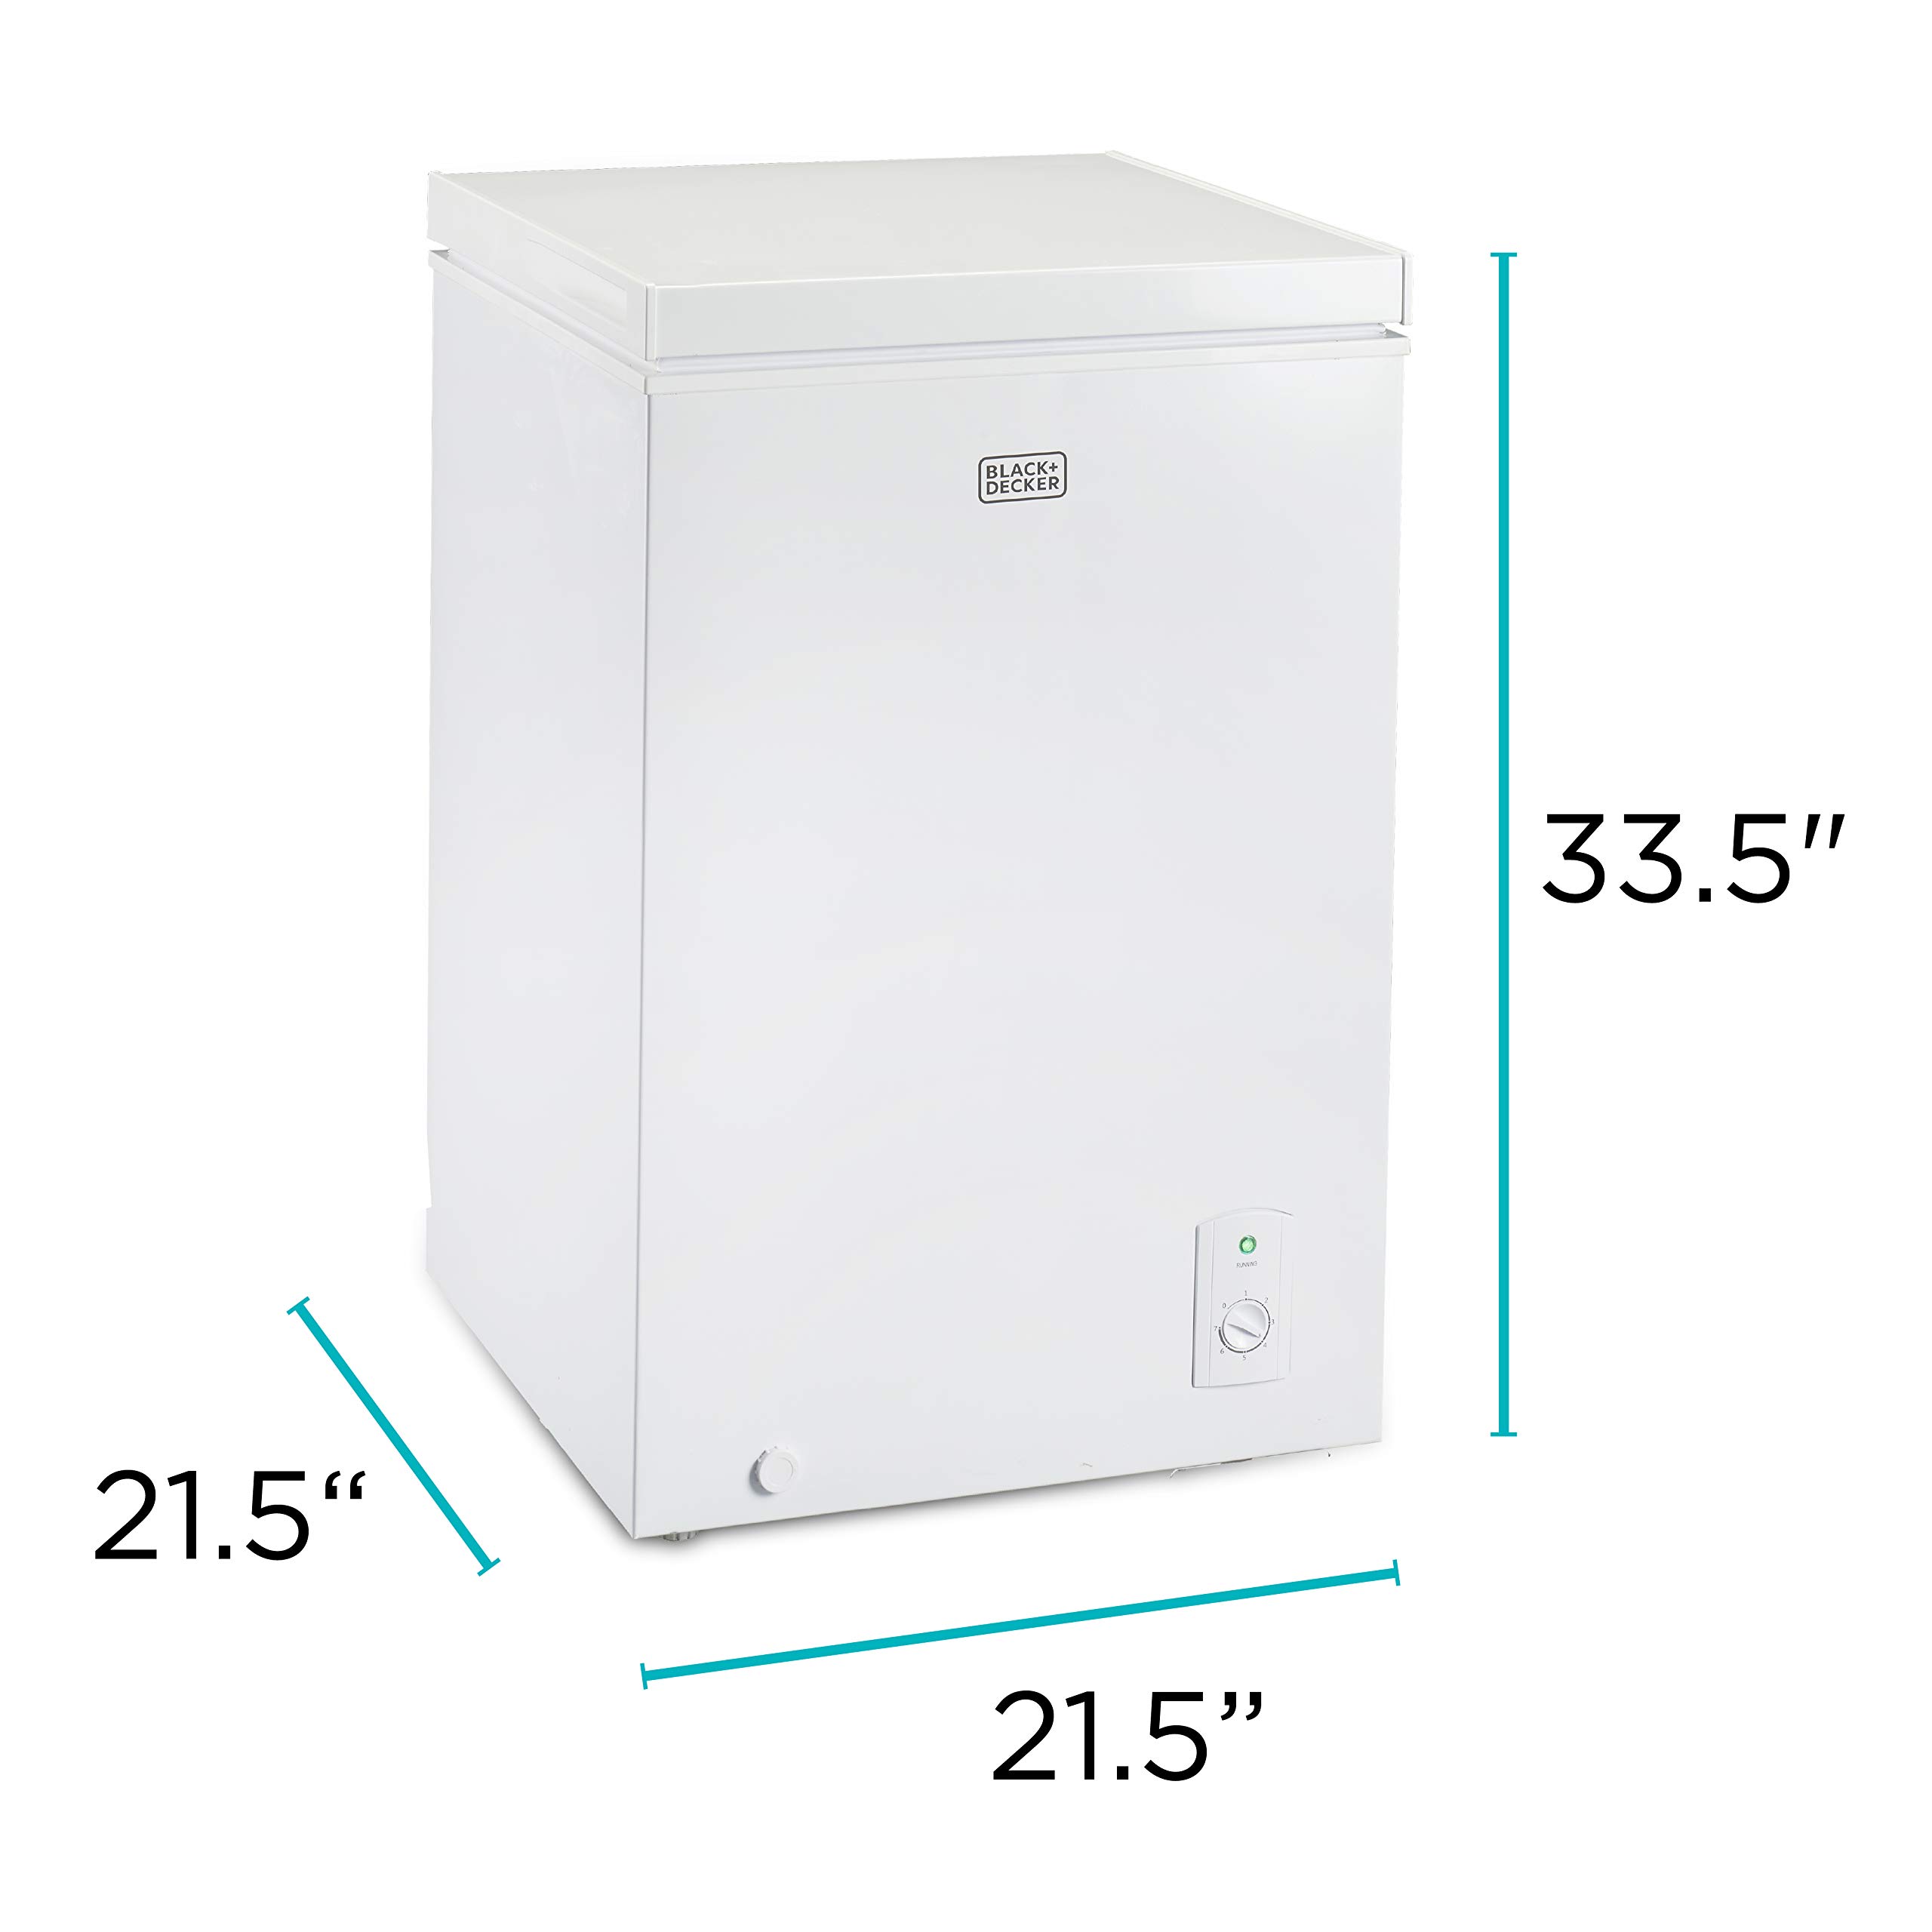 BLACK+DECKER 3.5 Cu. Ft. Chest Freezer, Holds up to 122 Lbs. of Frozen Food with Organizer Basket, BCFK356, White